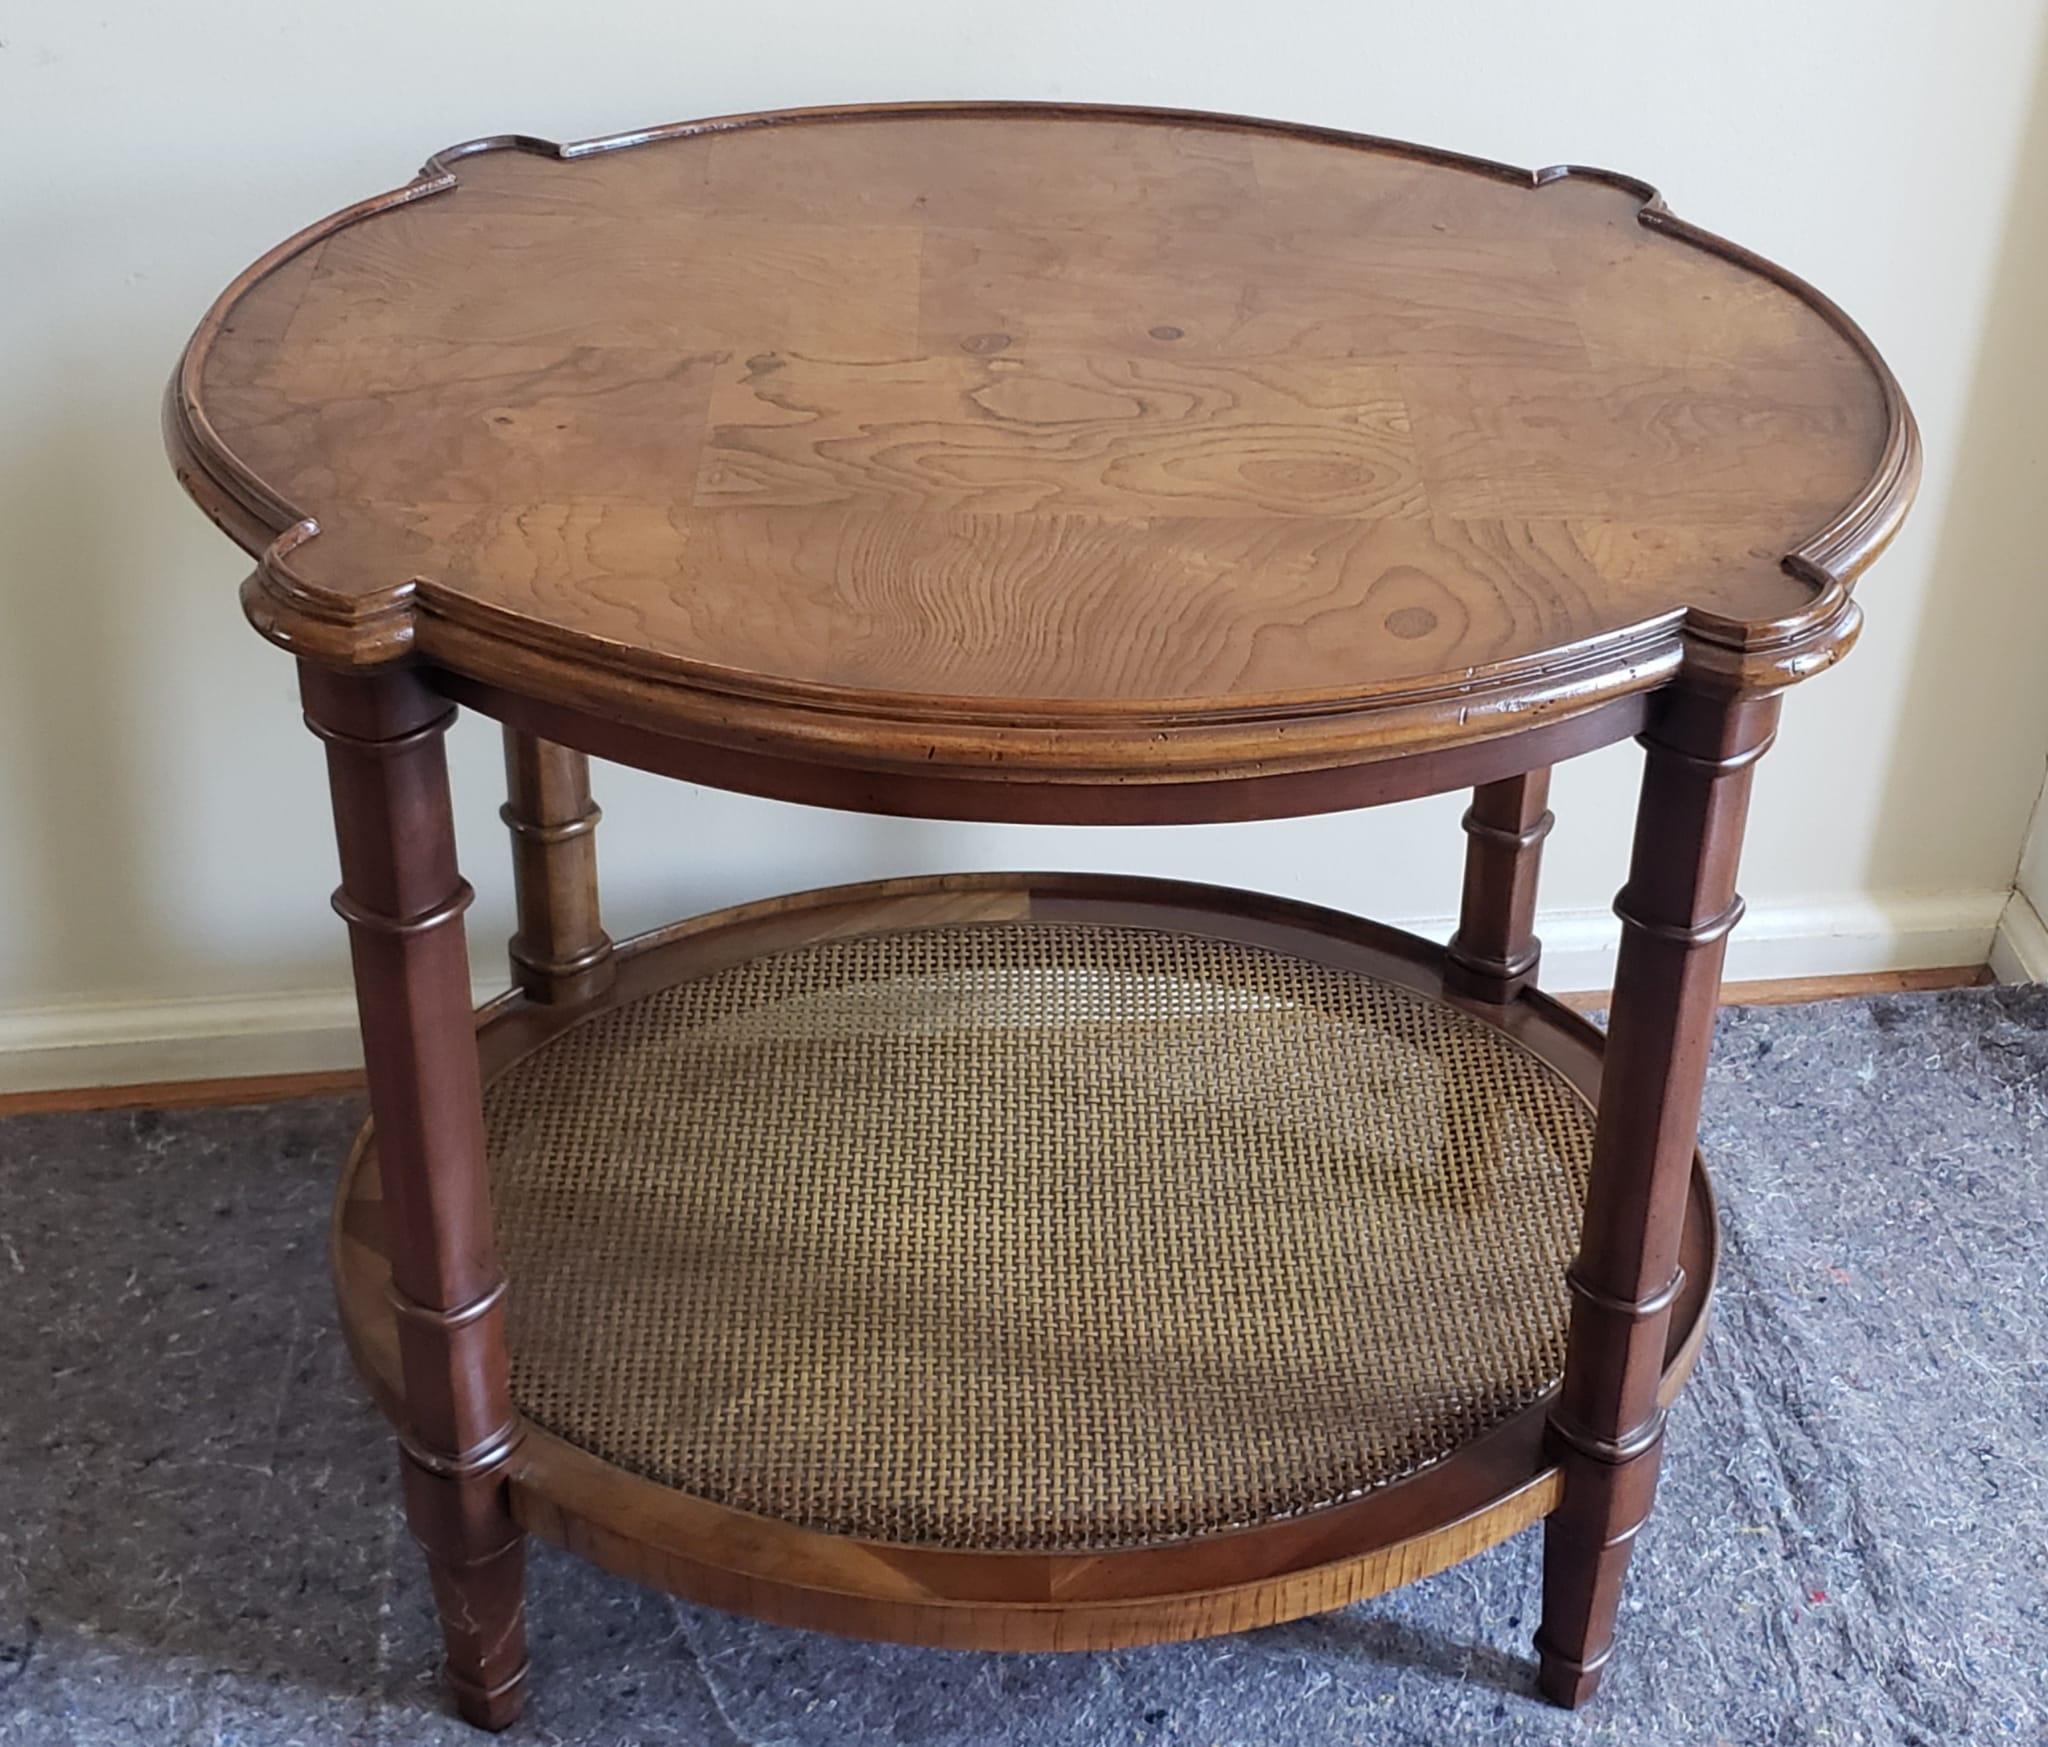 Mid-Century Burl Walnut and Cane Two-Tier Side Table with Pull-out Tray in good vintage condition. Top in burl walnut veener and lower tier tier cane top. Measures 21.75